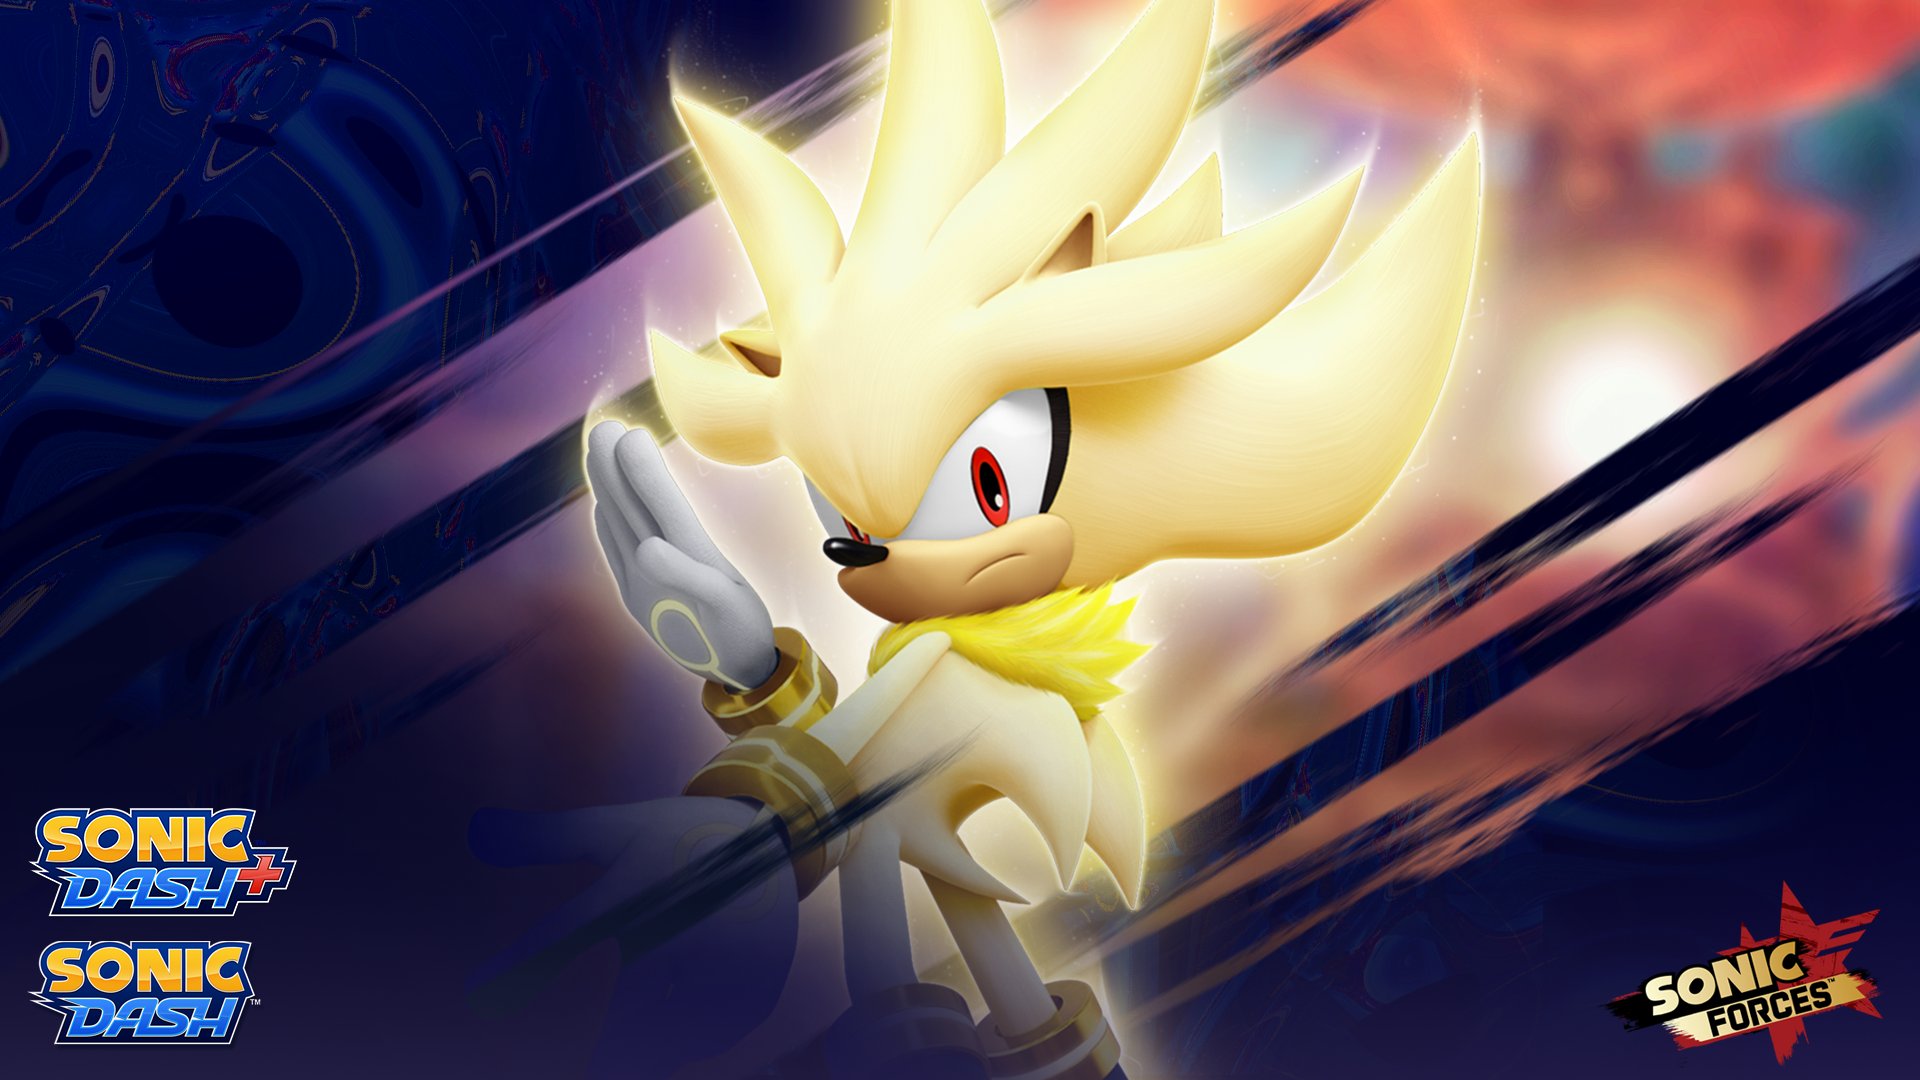 SEGA HARDlight on X: Power up your phones and shine bright with an all-new  wallpaper!✨There's still time to unlock and earn cards for brand new  Runner, Super Sonic, in #SonicForces Mobile. #Sonic30th